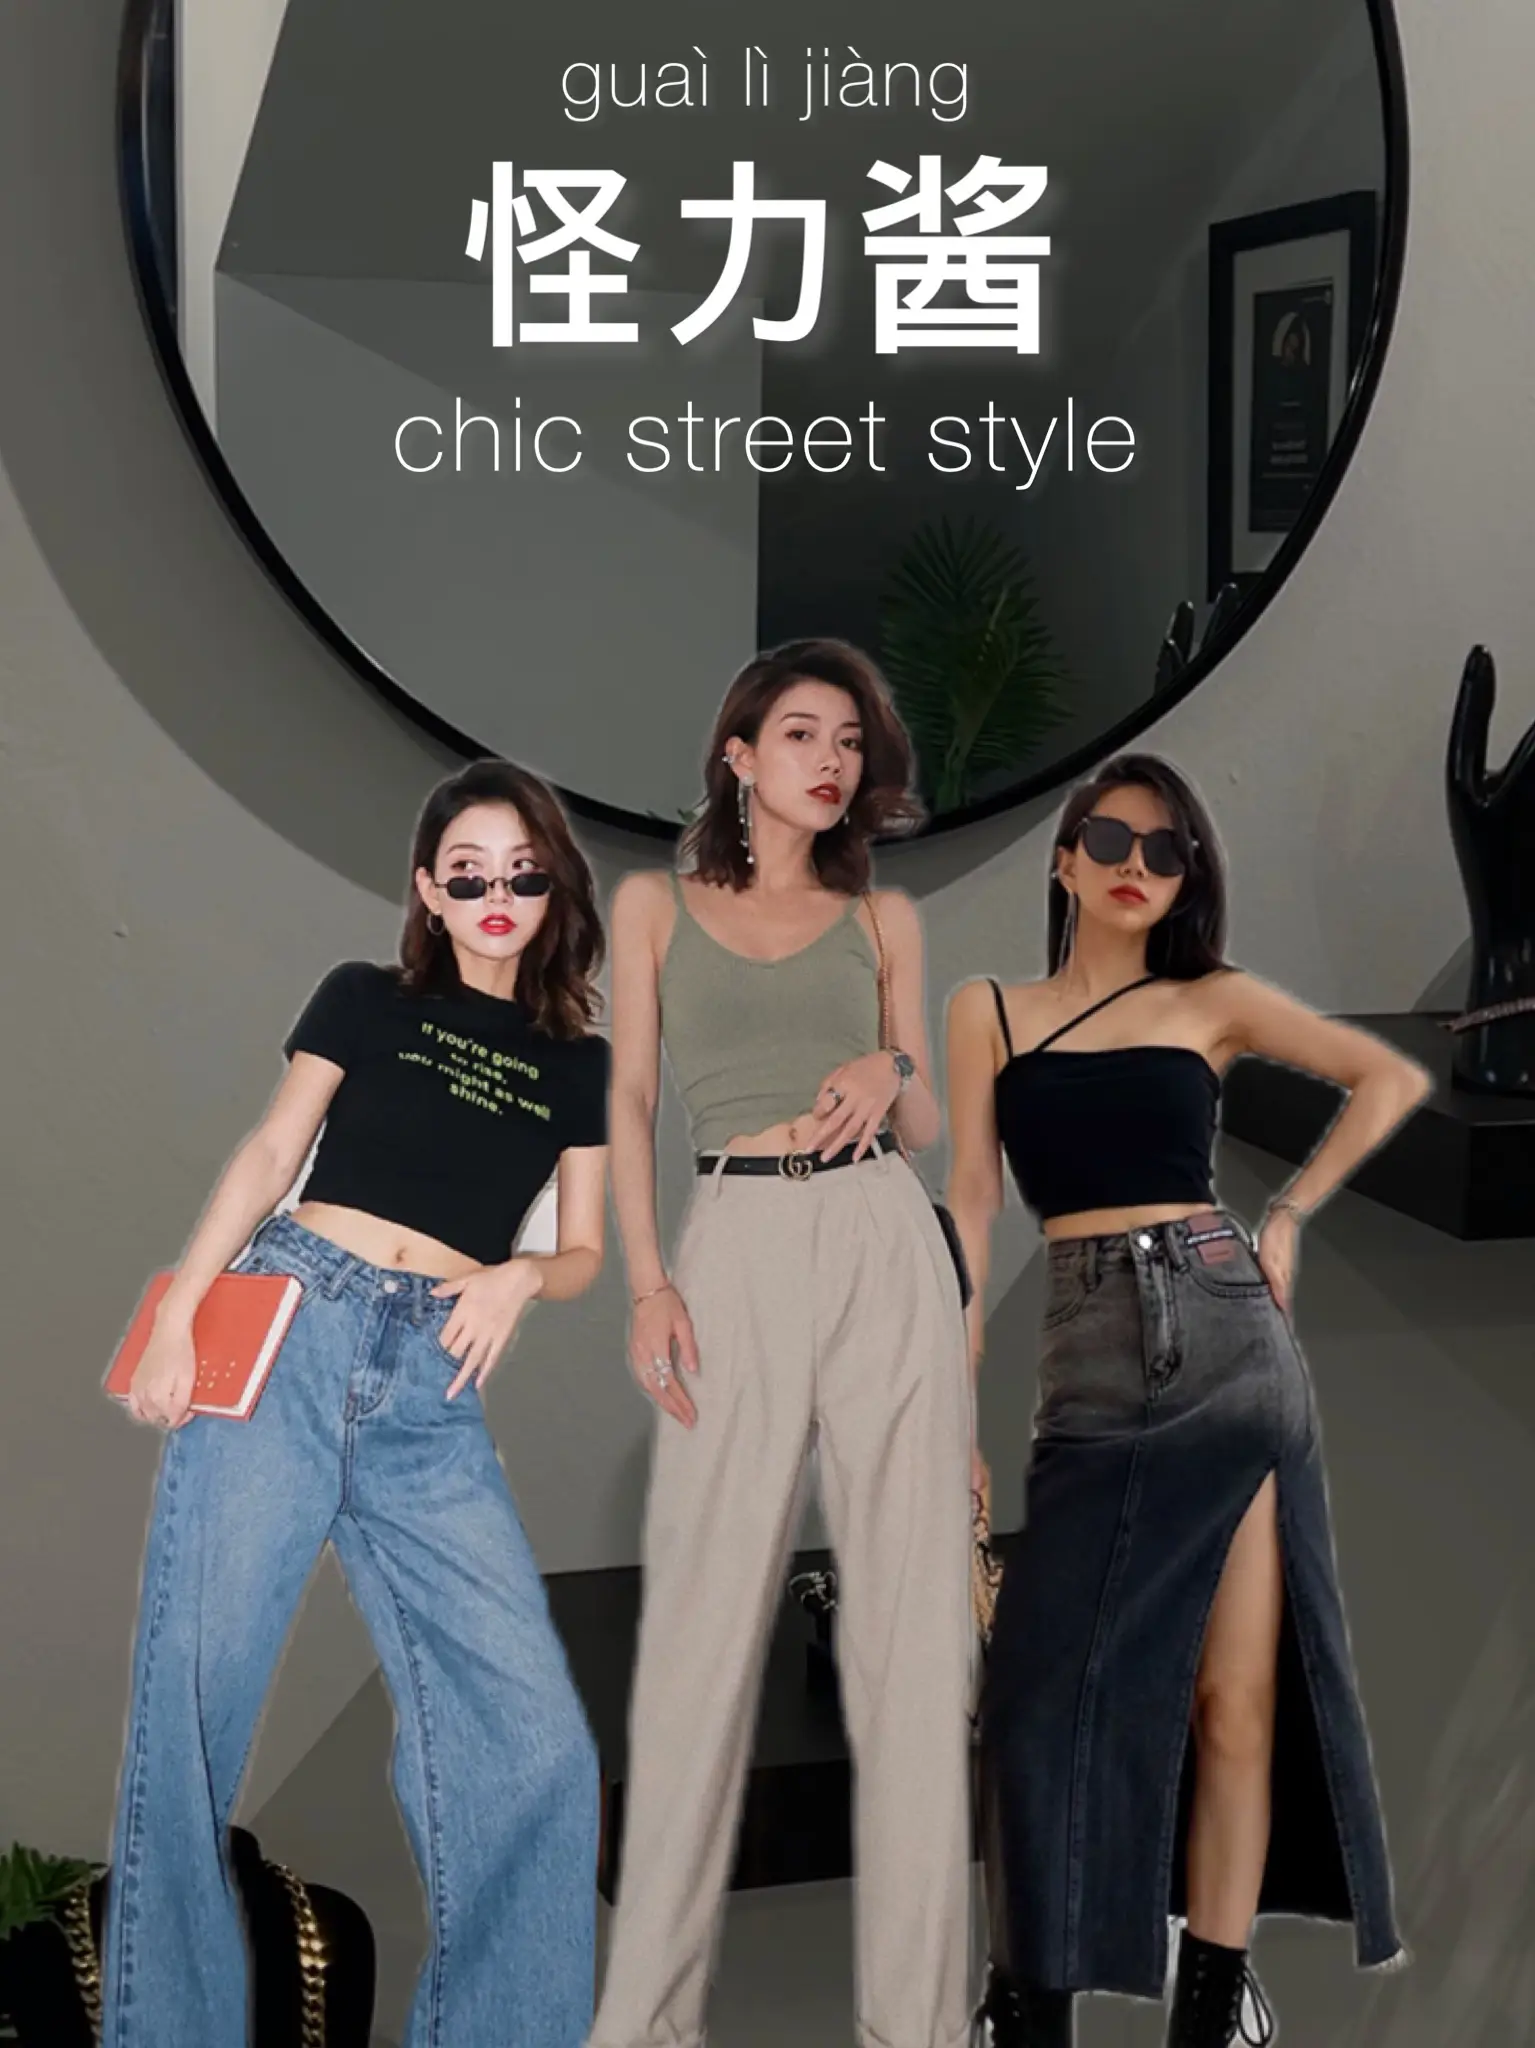 Best Taobao Stores for Clothes - Lemon8 Search